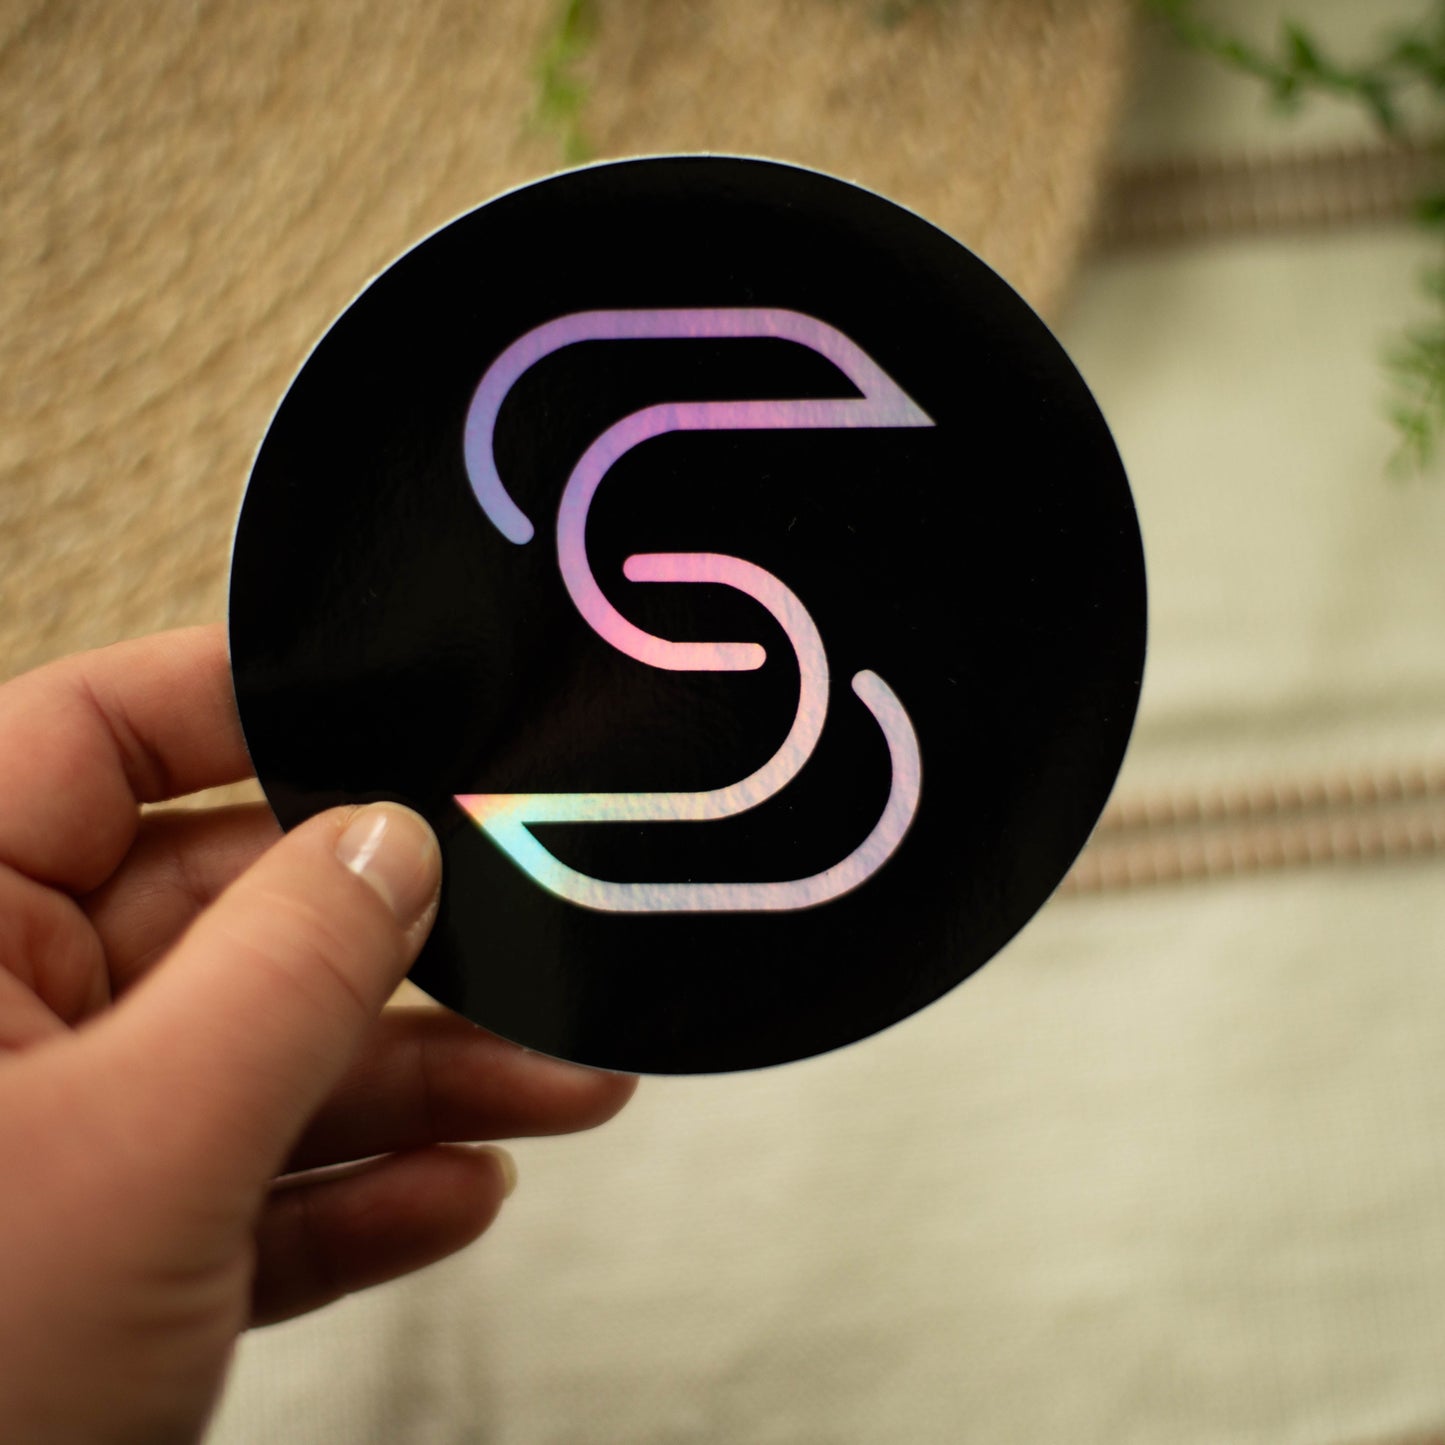 A hand holding a circular holographic sticker of the Stickr logo